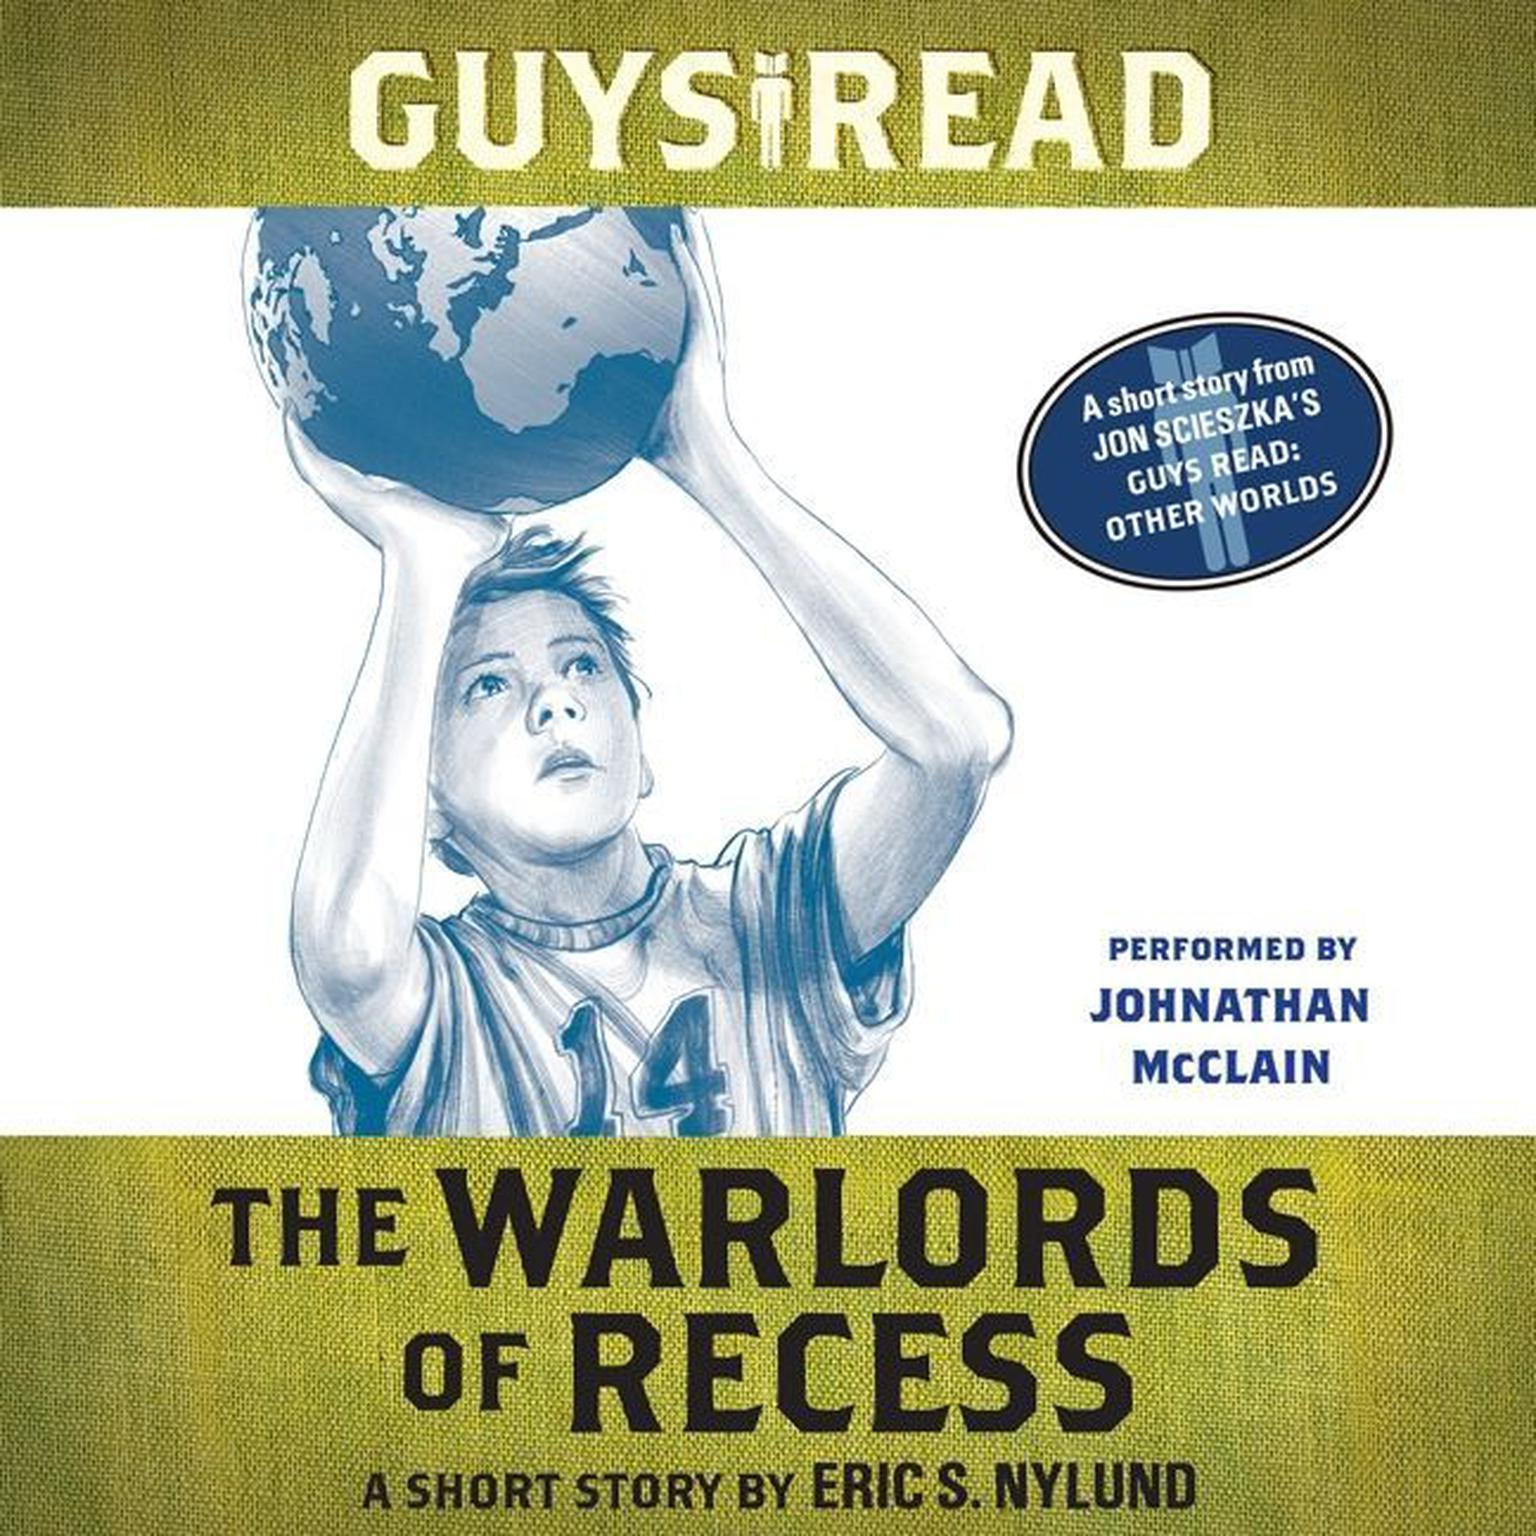 Guys Read: The Warlords of Recess: A Short Story from Guys Read: Other Worlds Audiobook, by Eric Nylund